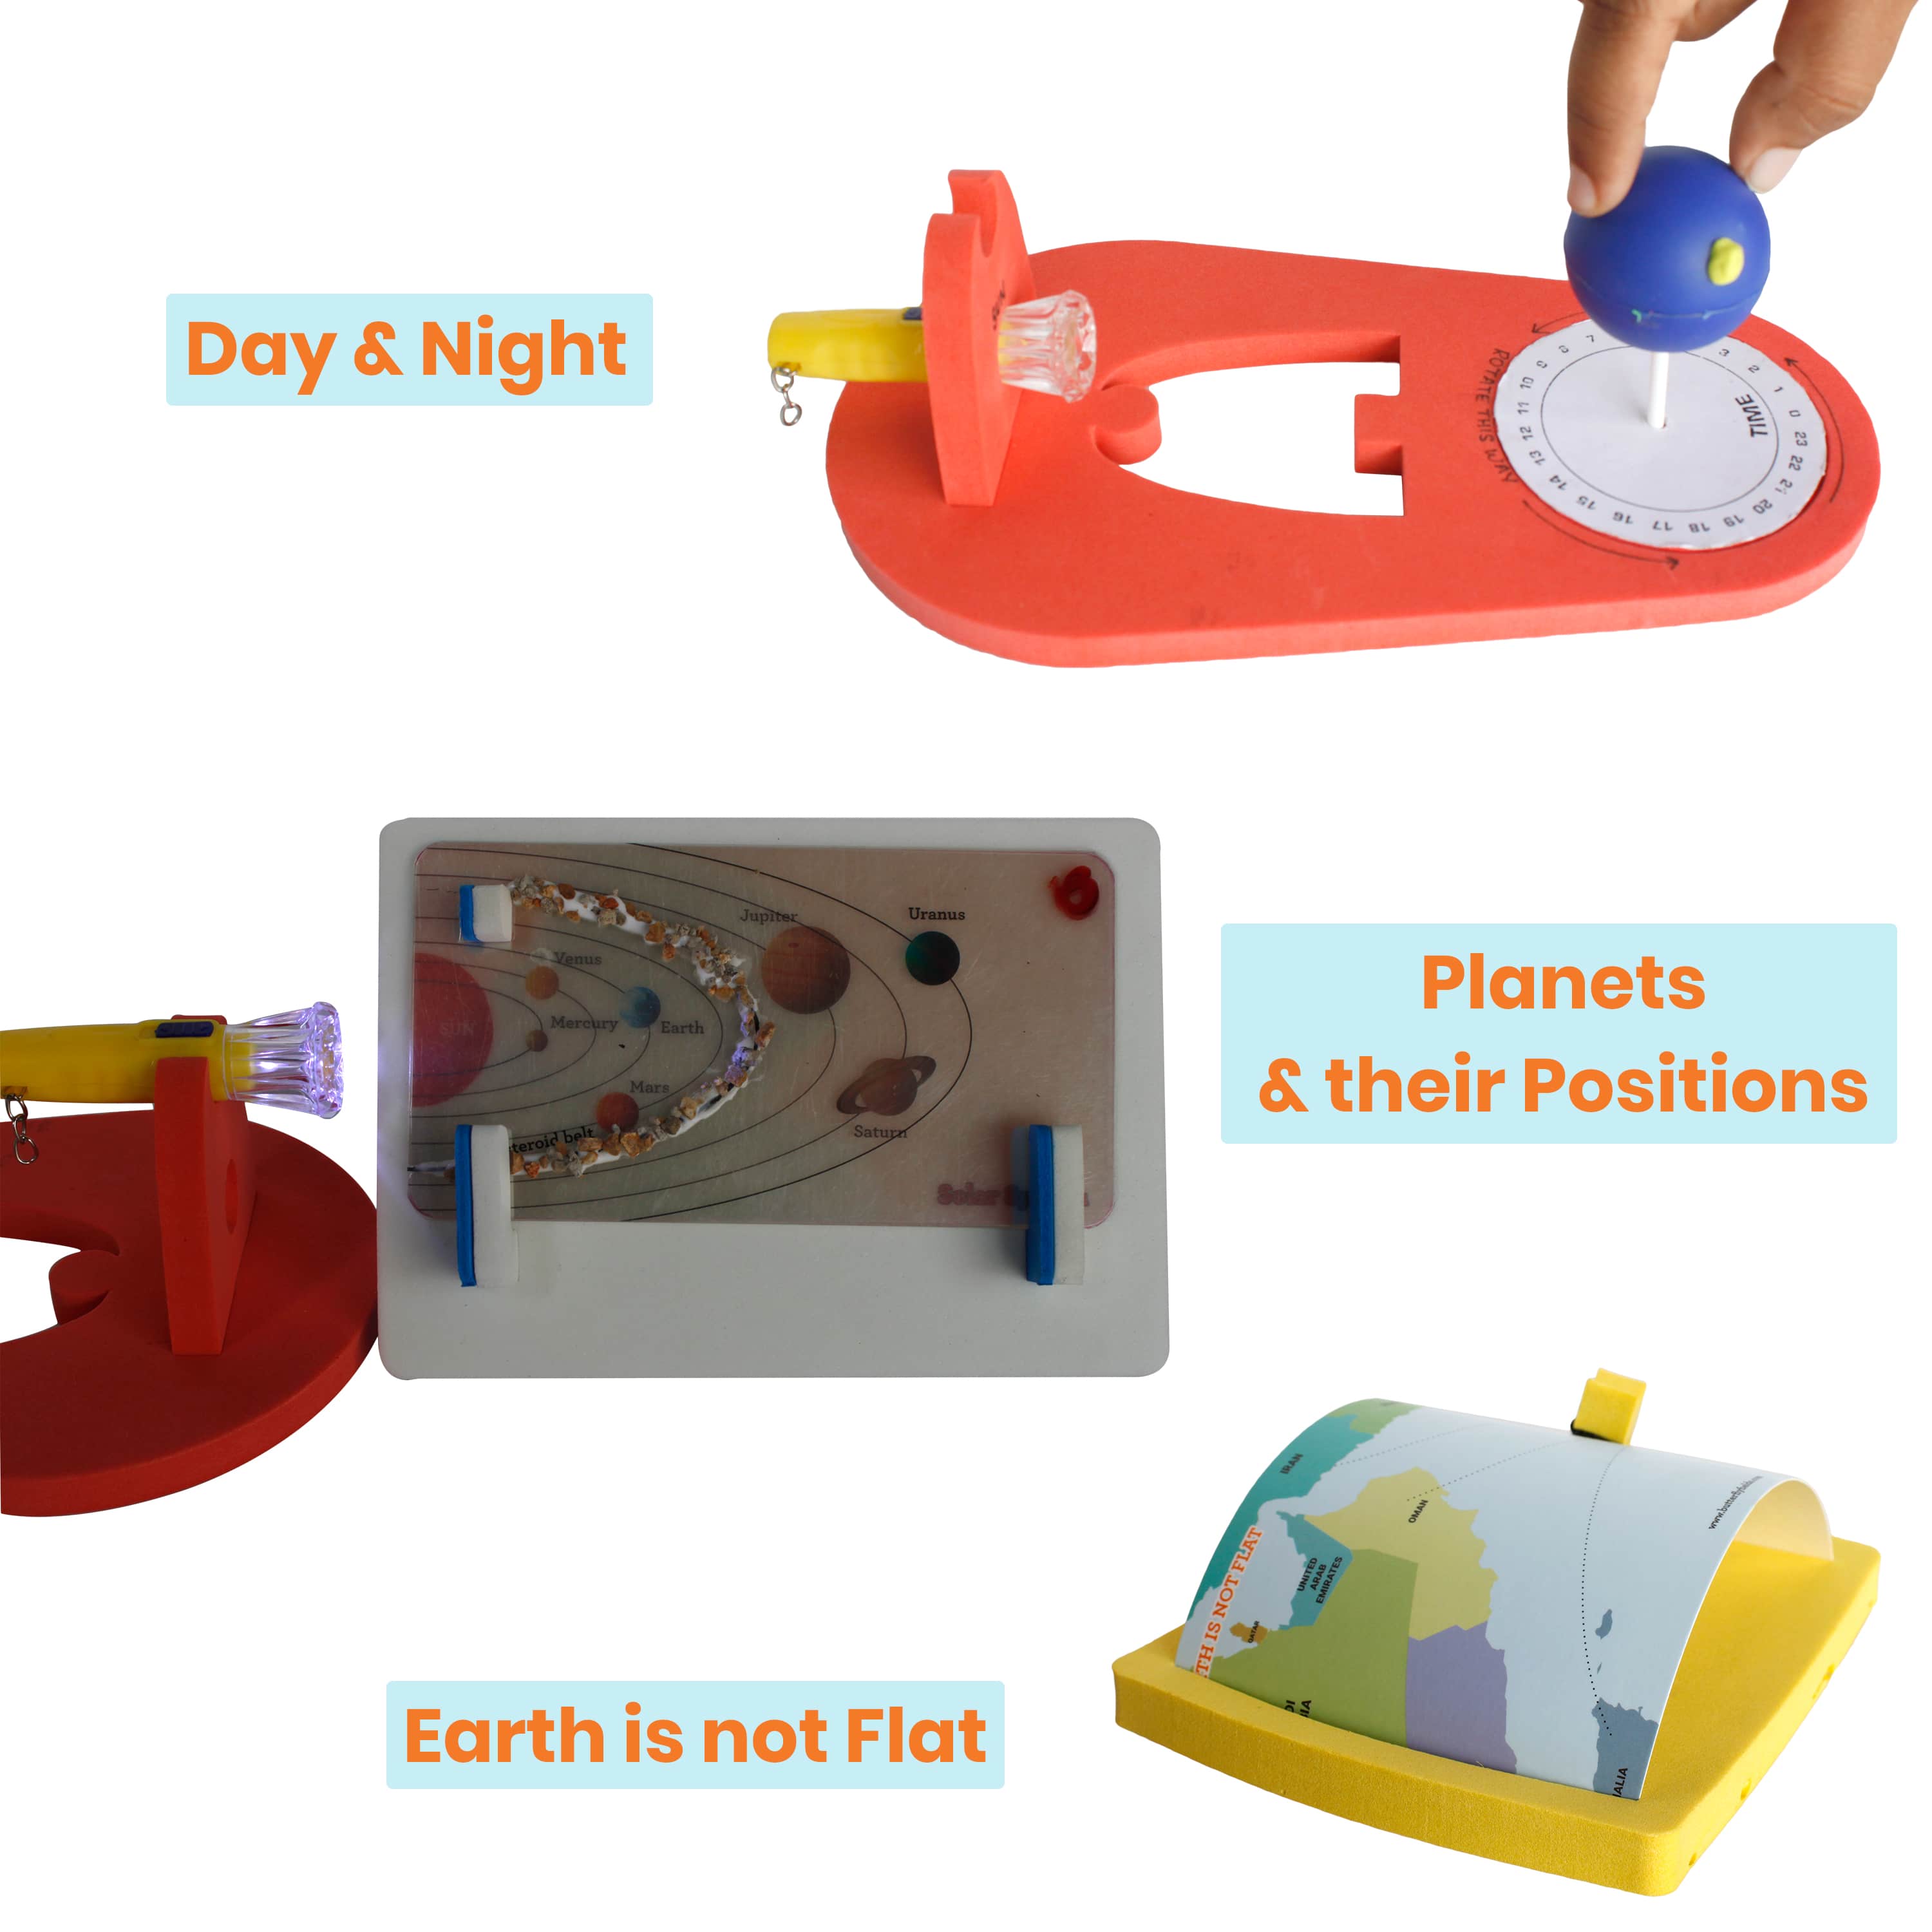 Solar System - Planets and its Features diy activity science project kit for kids